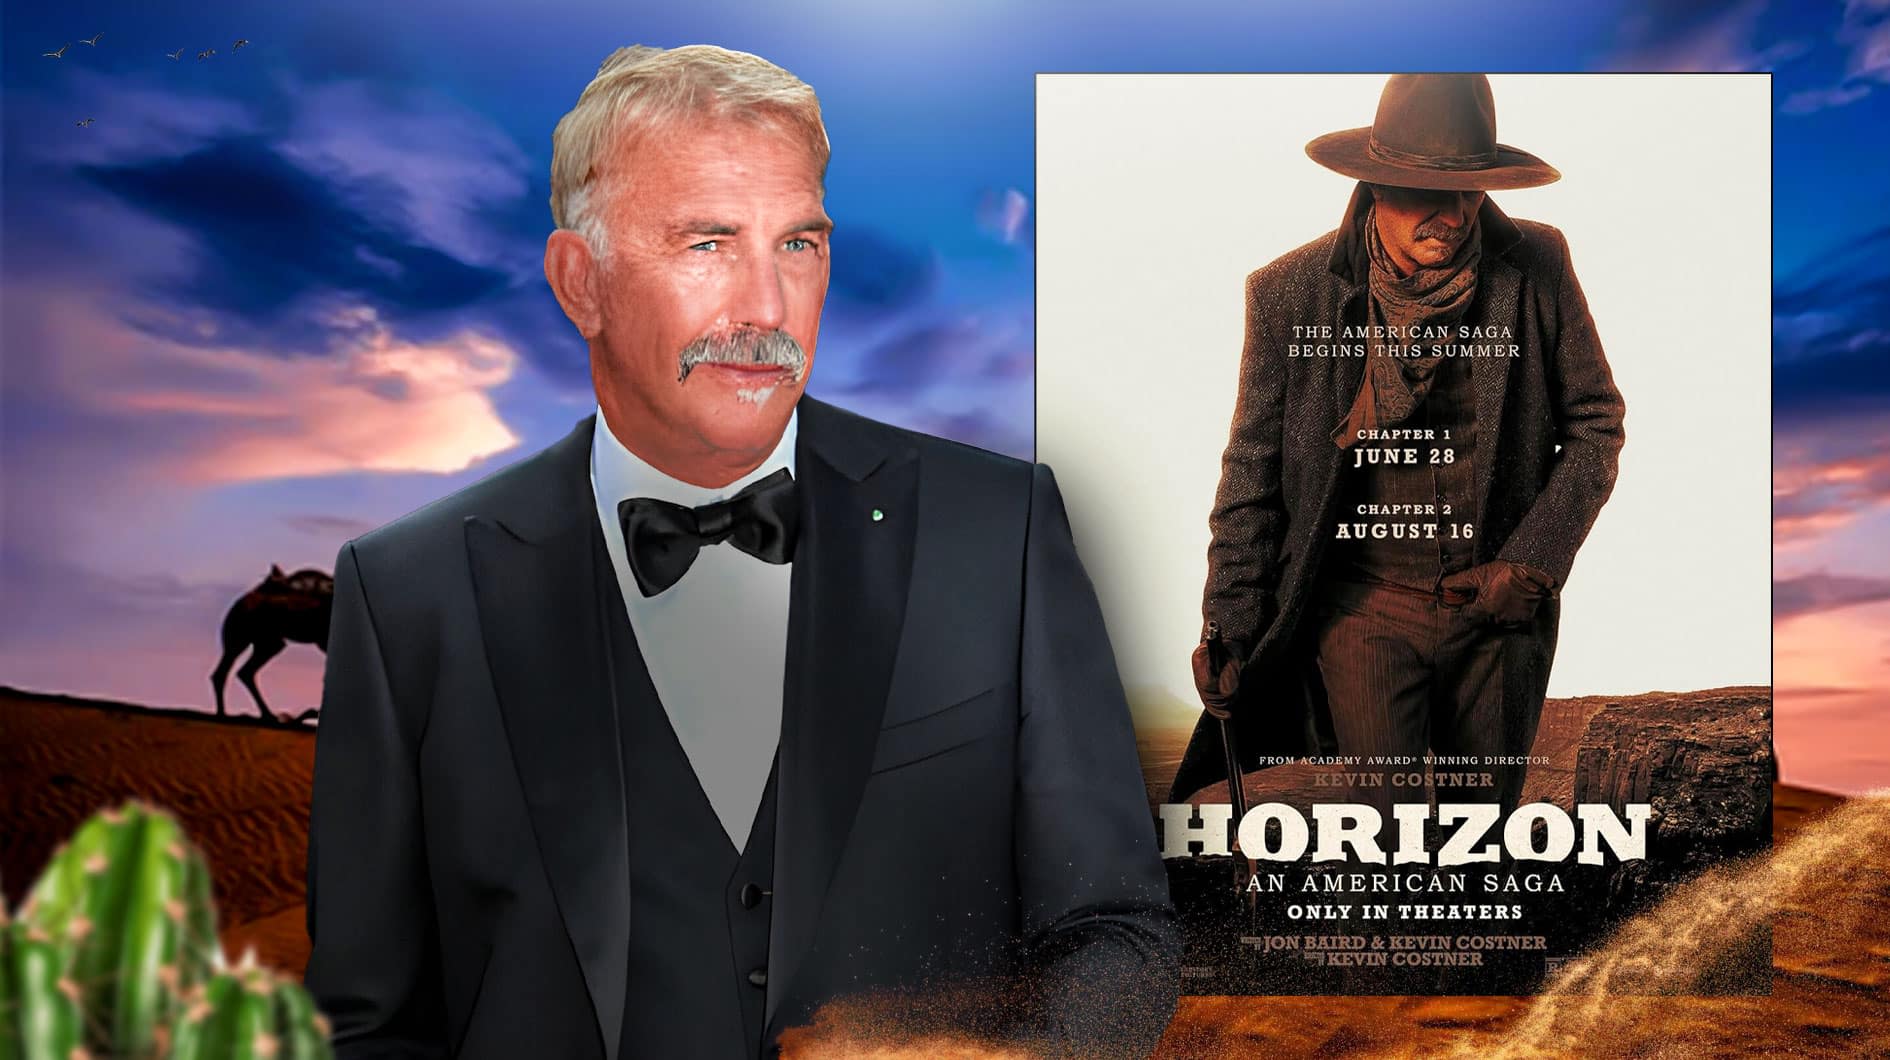 Kevin Costner was in tears over Cannes applause to Horizon